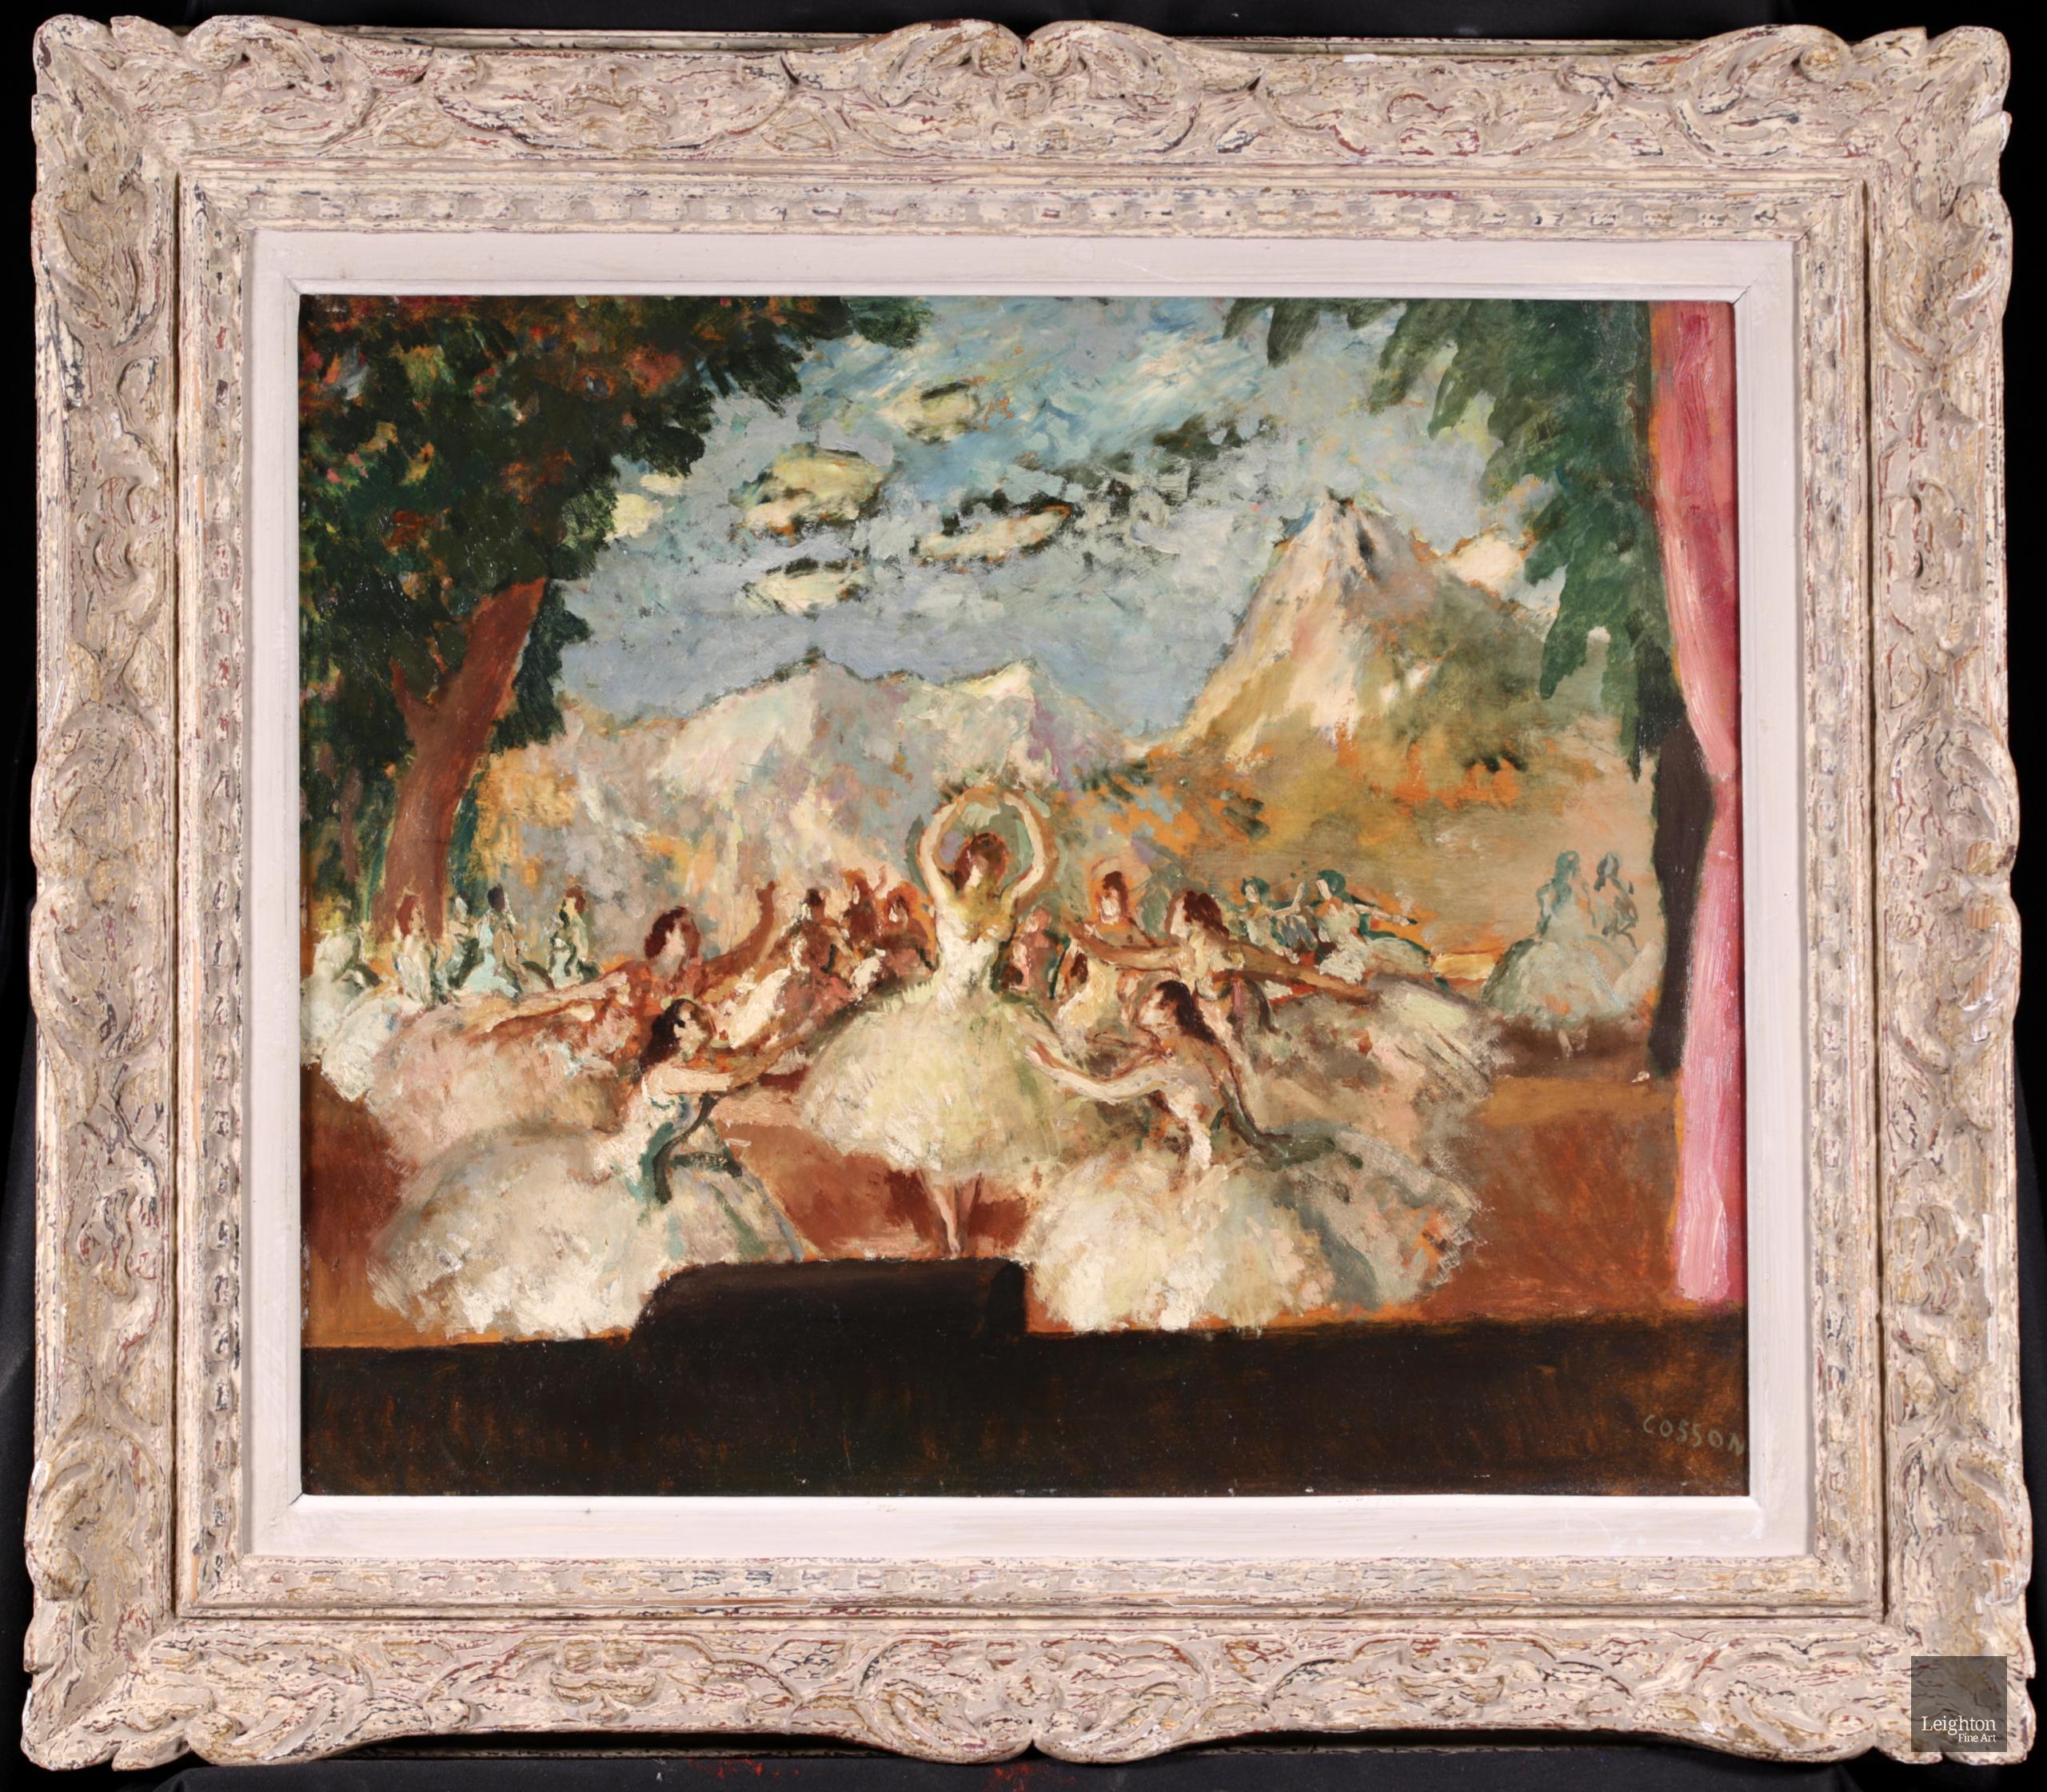 Jean-Louis-Marcel Cosson Interior Painting - Dancers on a Stage - Post Impressionist Oil, Figures in Interior - Marcel Cosson